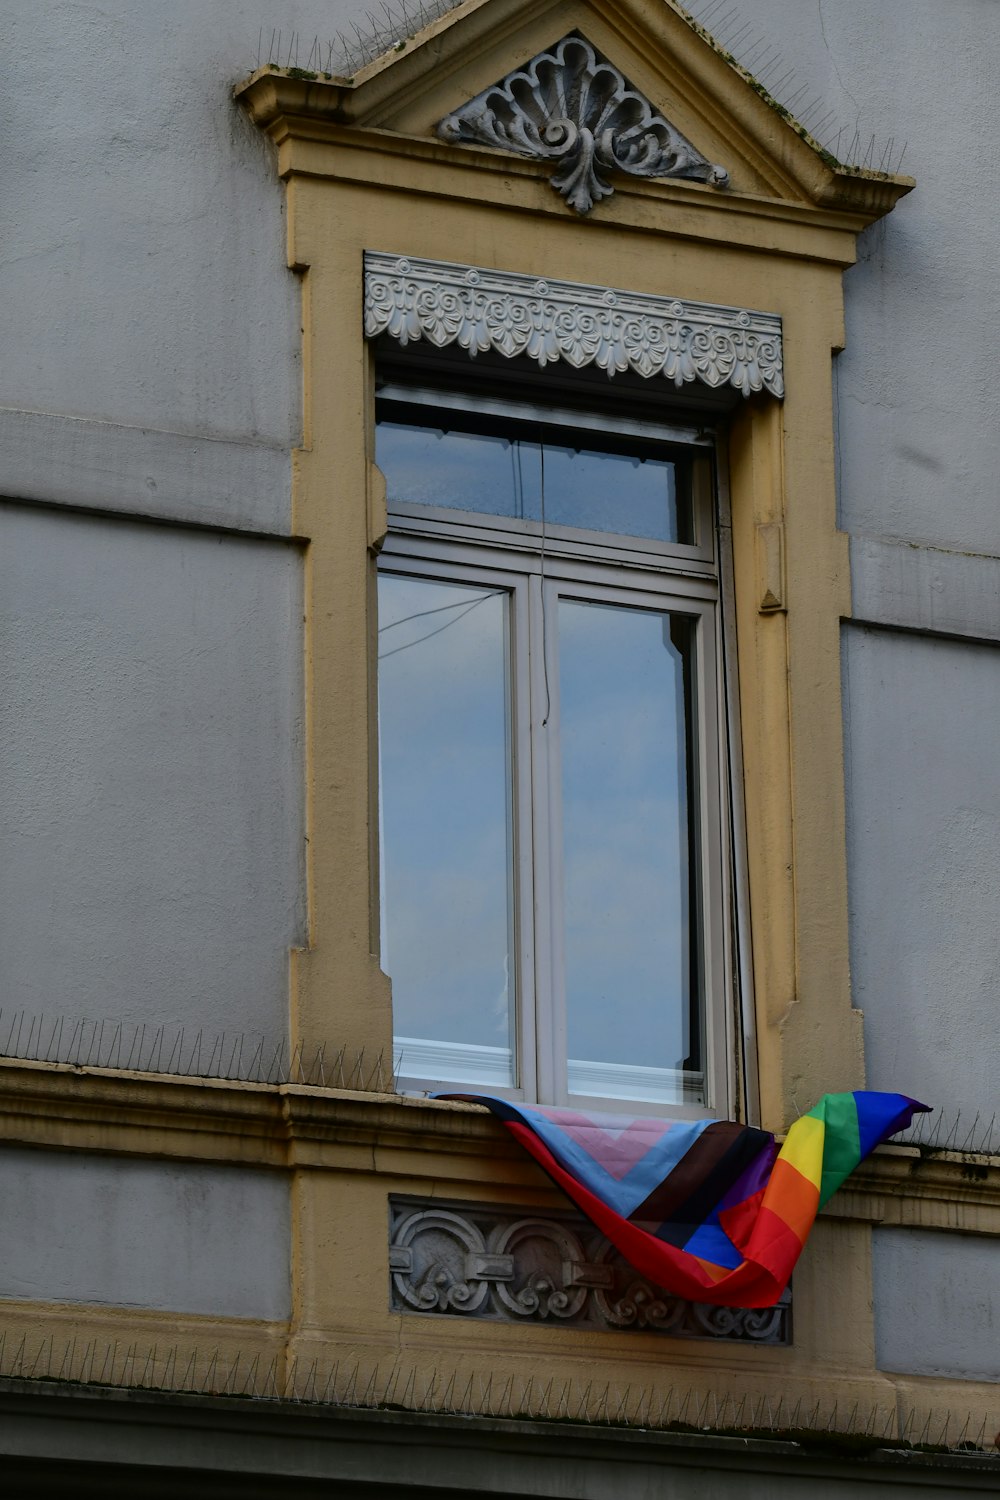 a kite is flying in front of a window